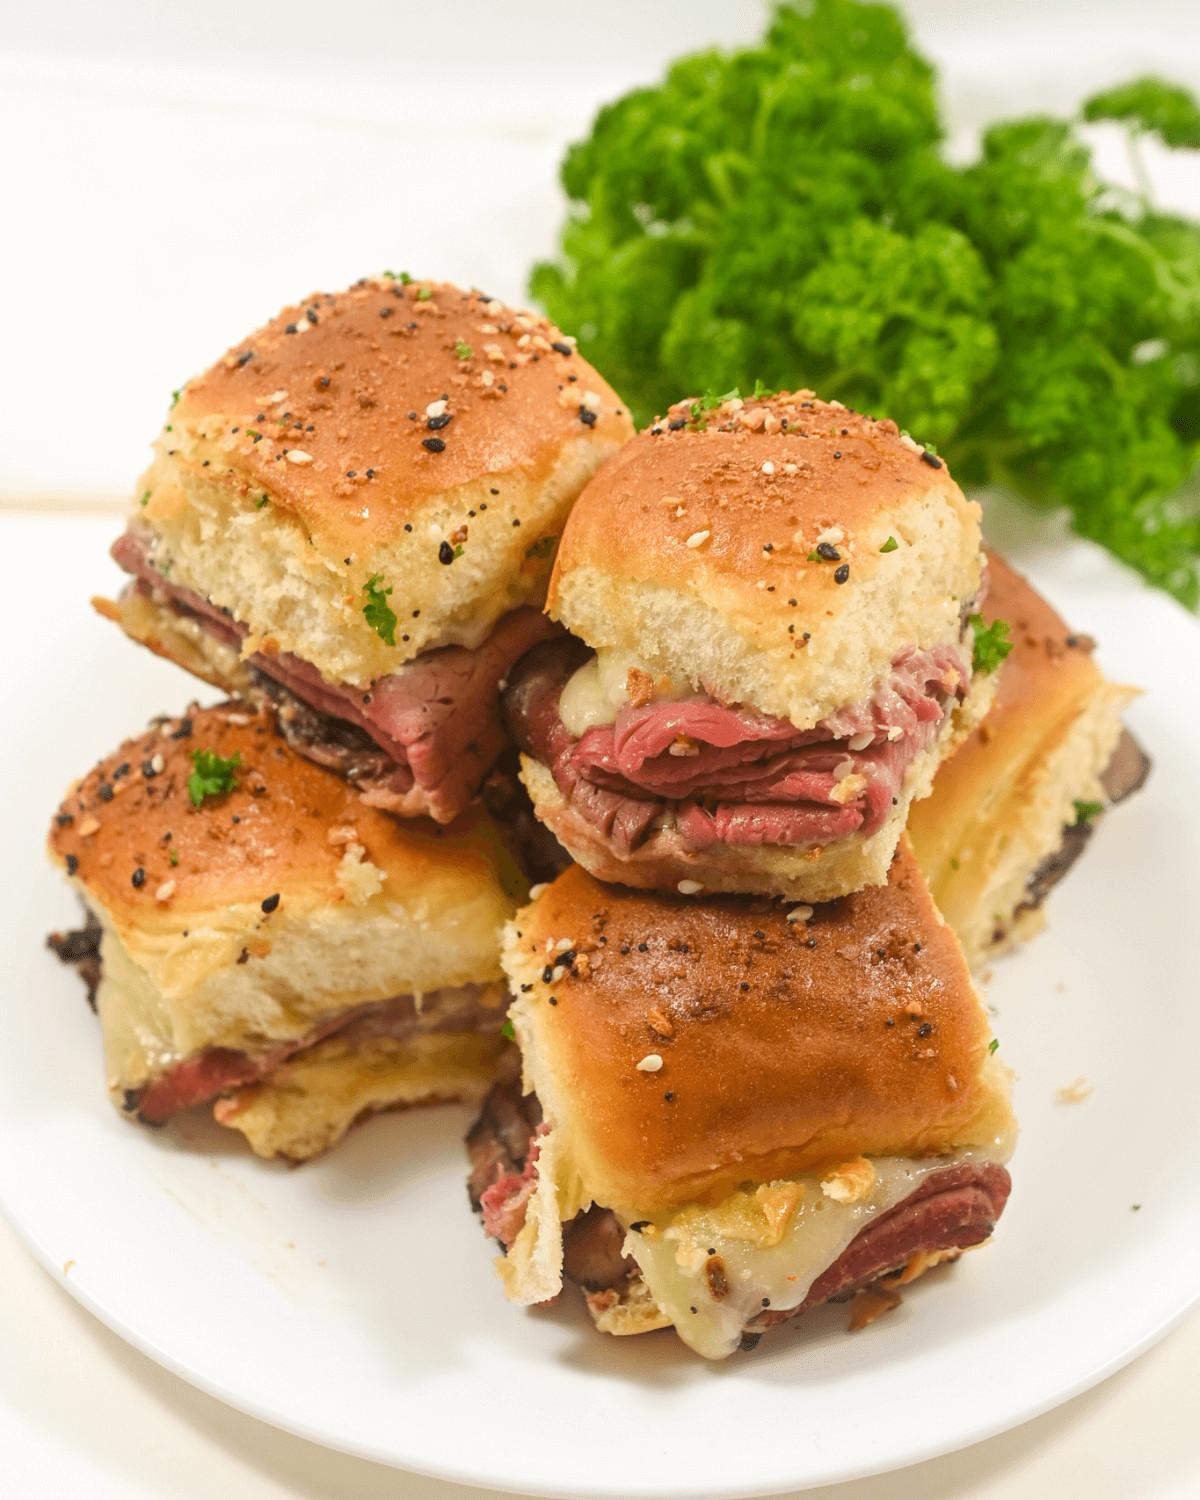 A plate of roast beef sliders with meat and cheese and Dijon sauce.